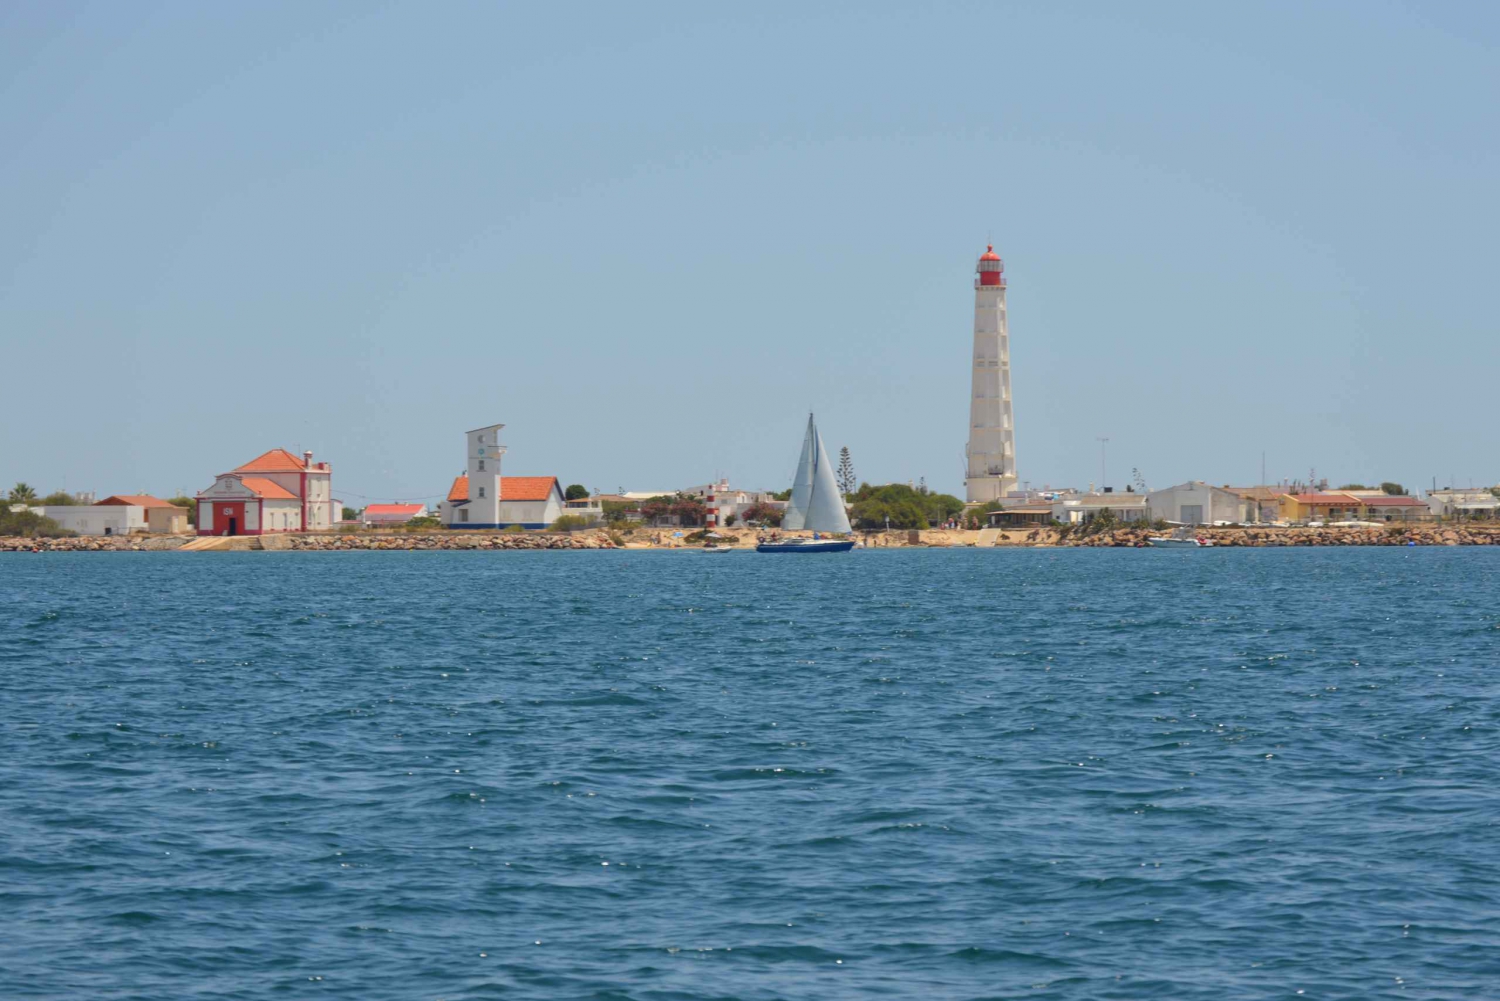 Boat trip through the Ria Formosa Natural Park and Islands